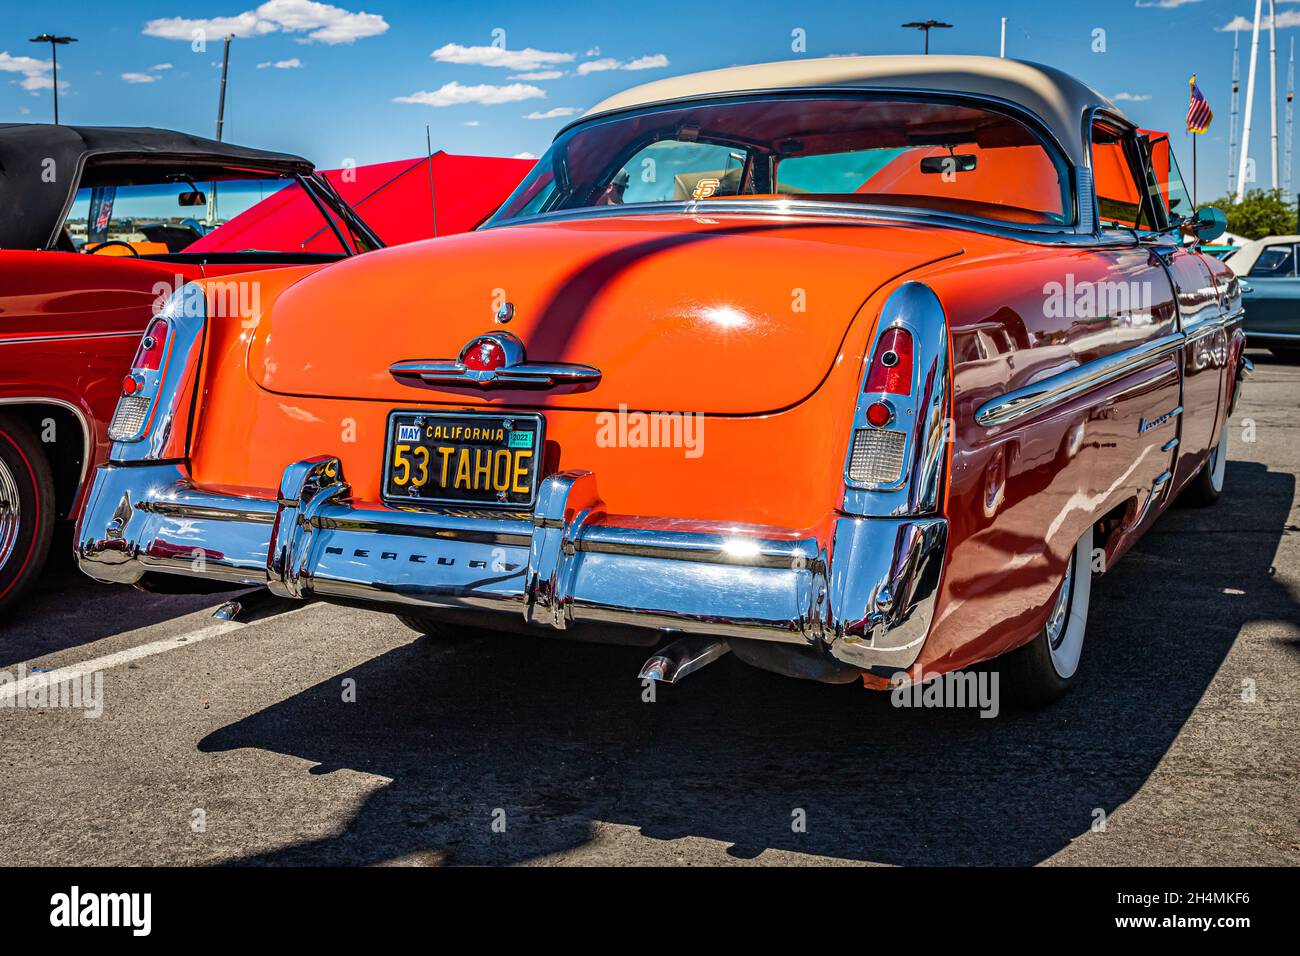 Reno, NV - August 4, 2021: 1953 Mercury Monterey Special Custom Hardetop Coupe at a local car show. Stock Photo